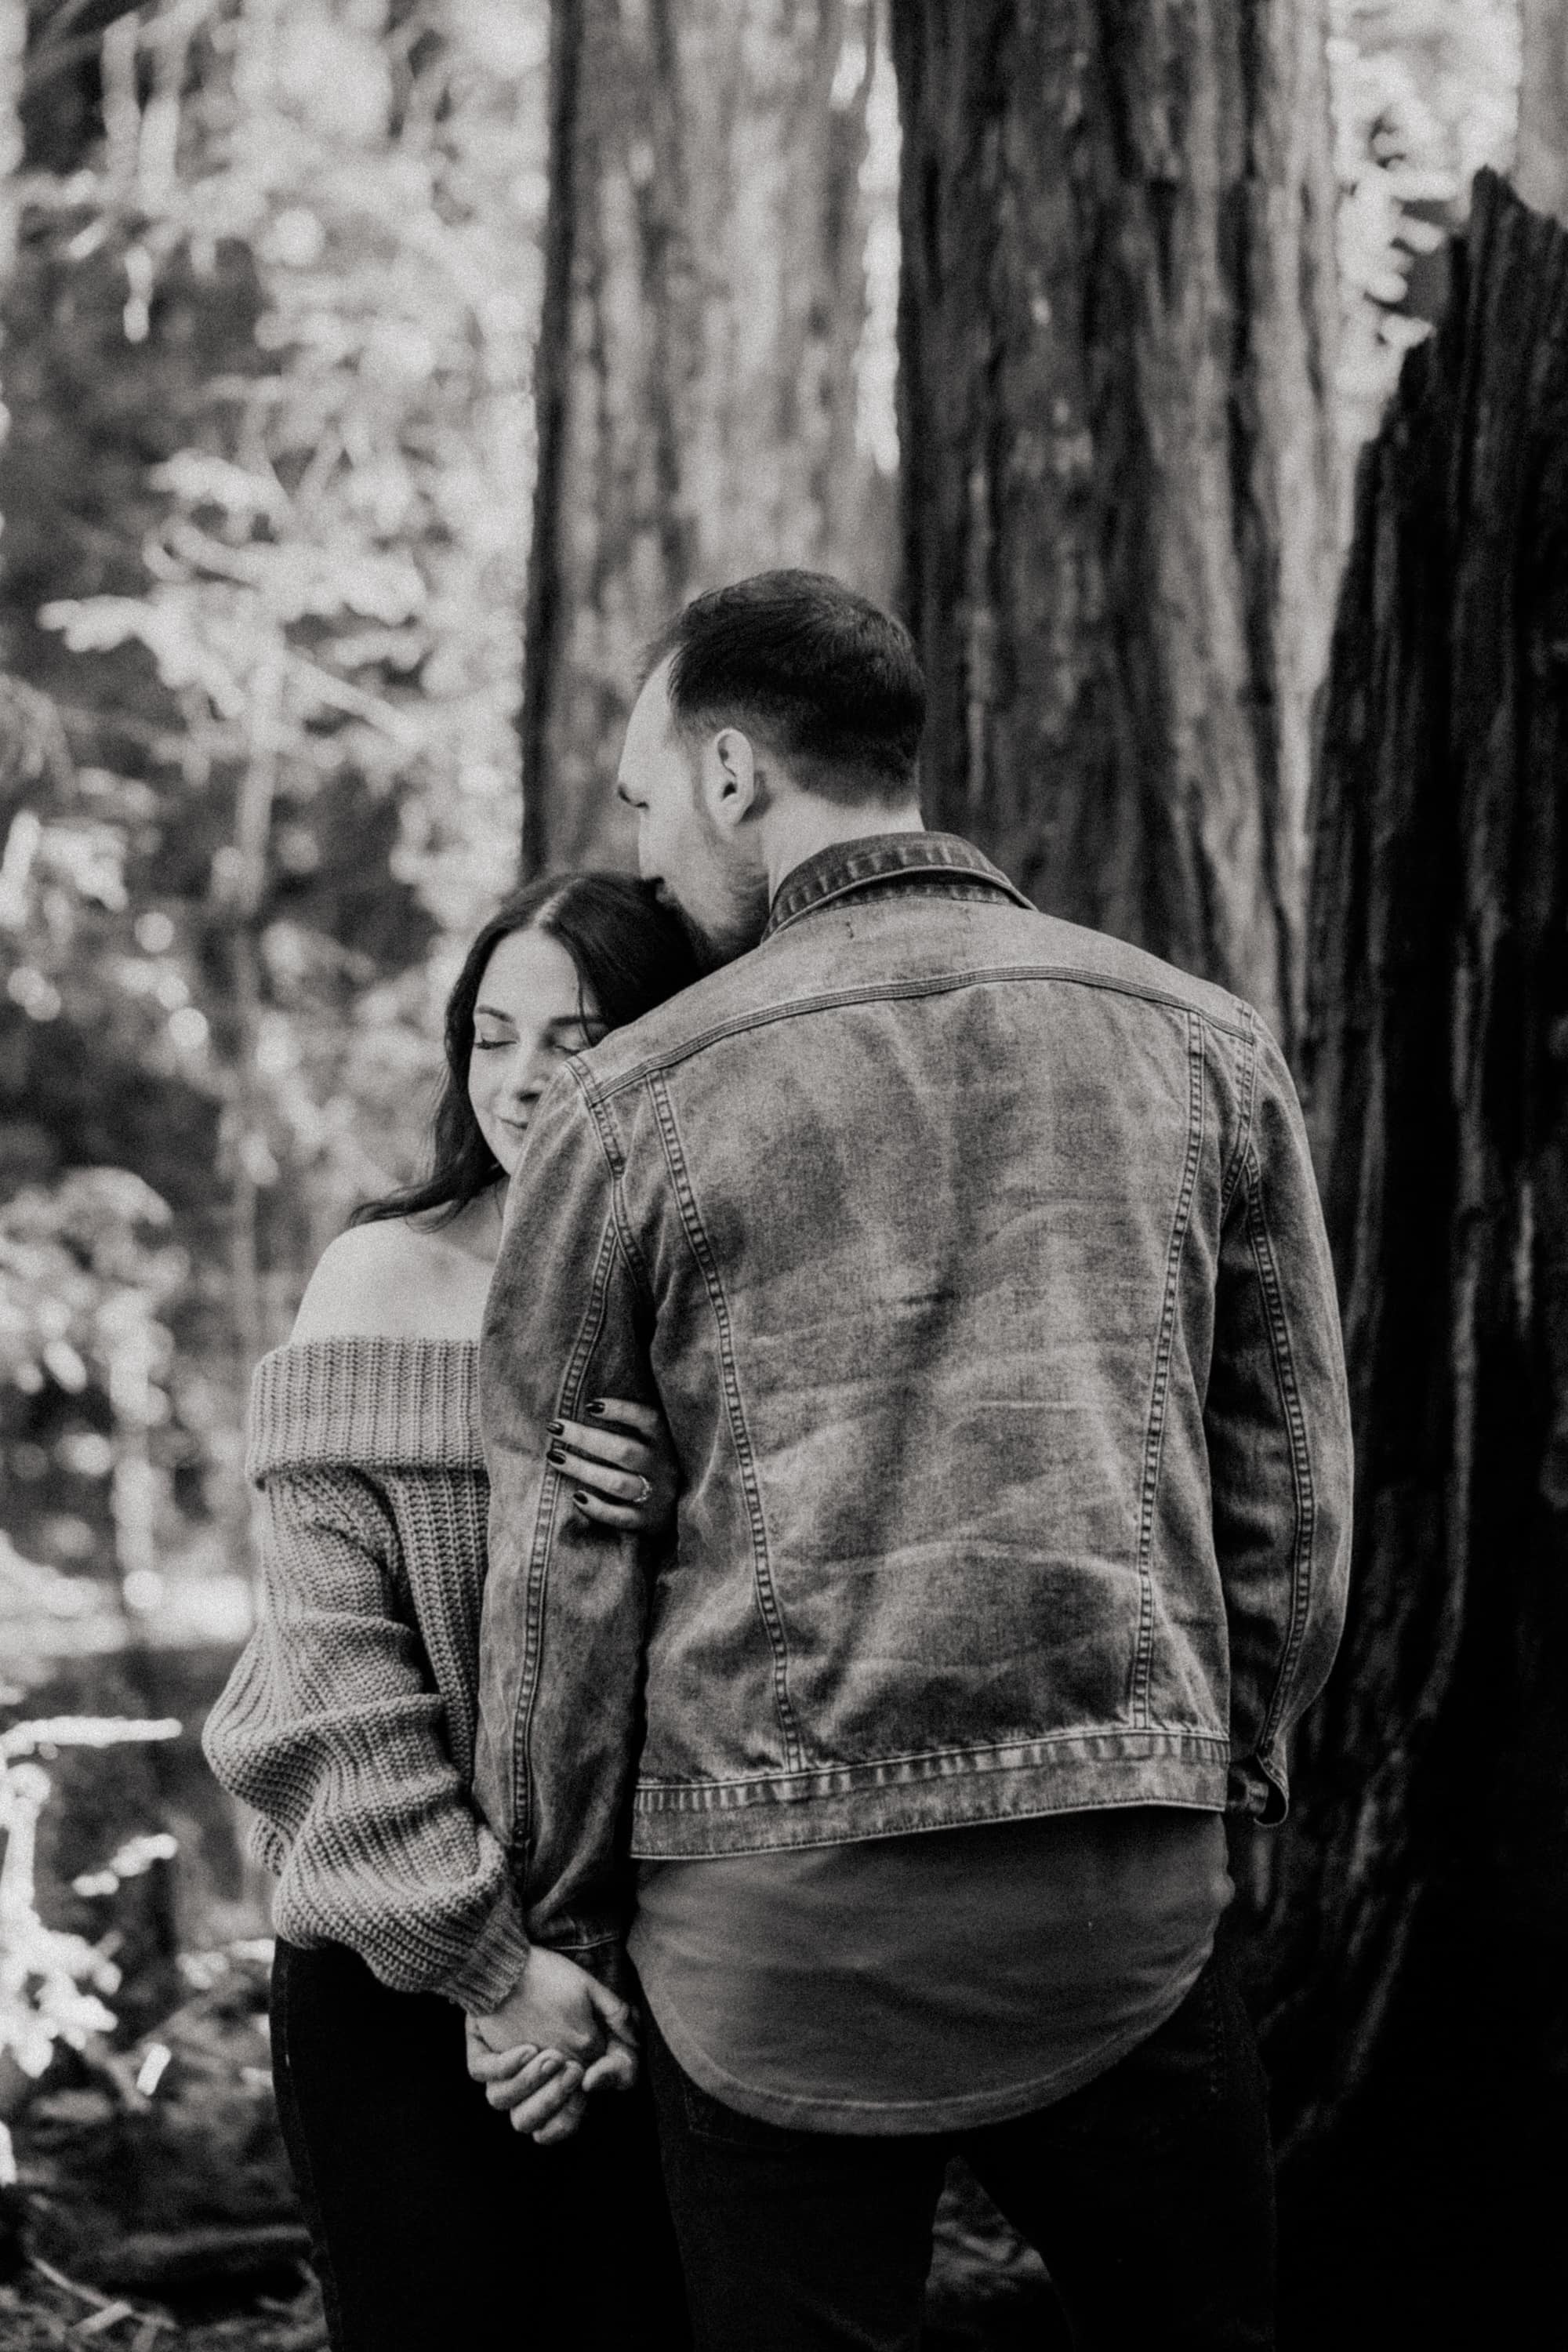 The couple share a sweet moment among the towering redwood trees at Henry Cowell Redwoods State Park.